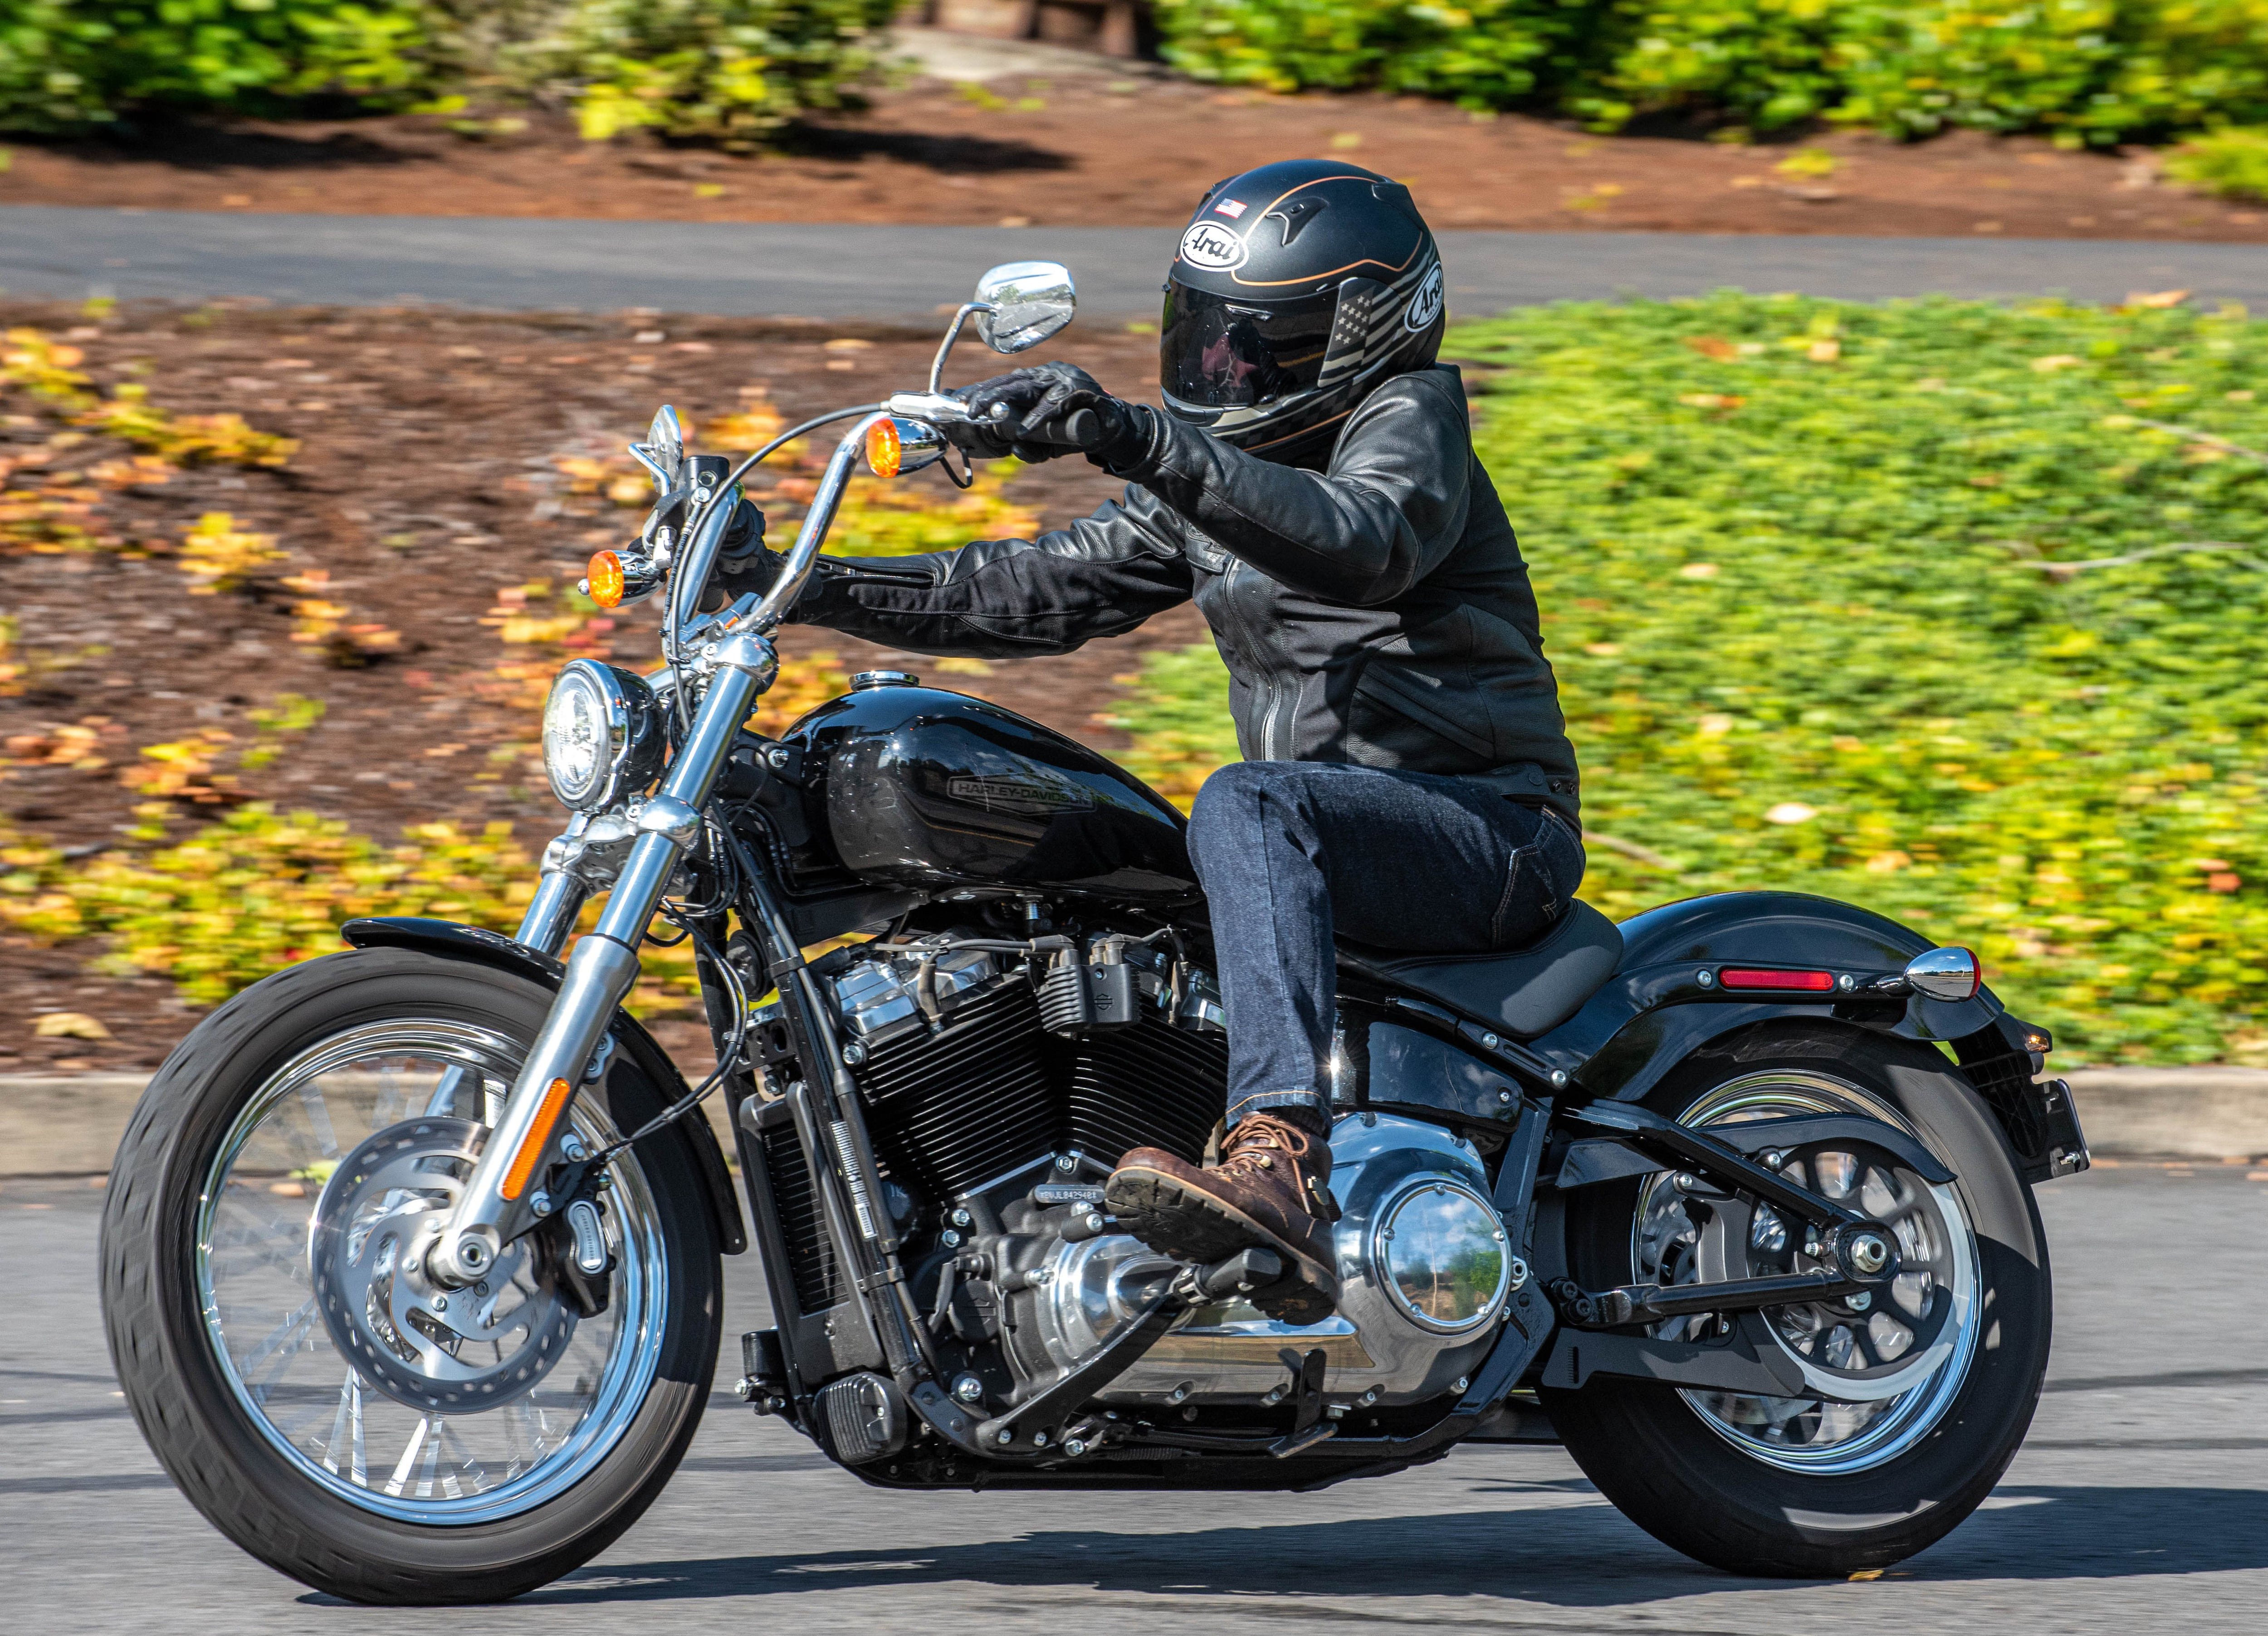 2020 Harley-Davidson Softail Standard Review, Part 1 | Cycle World